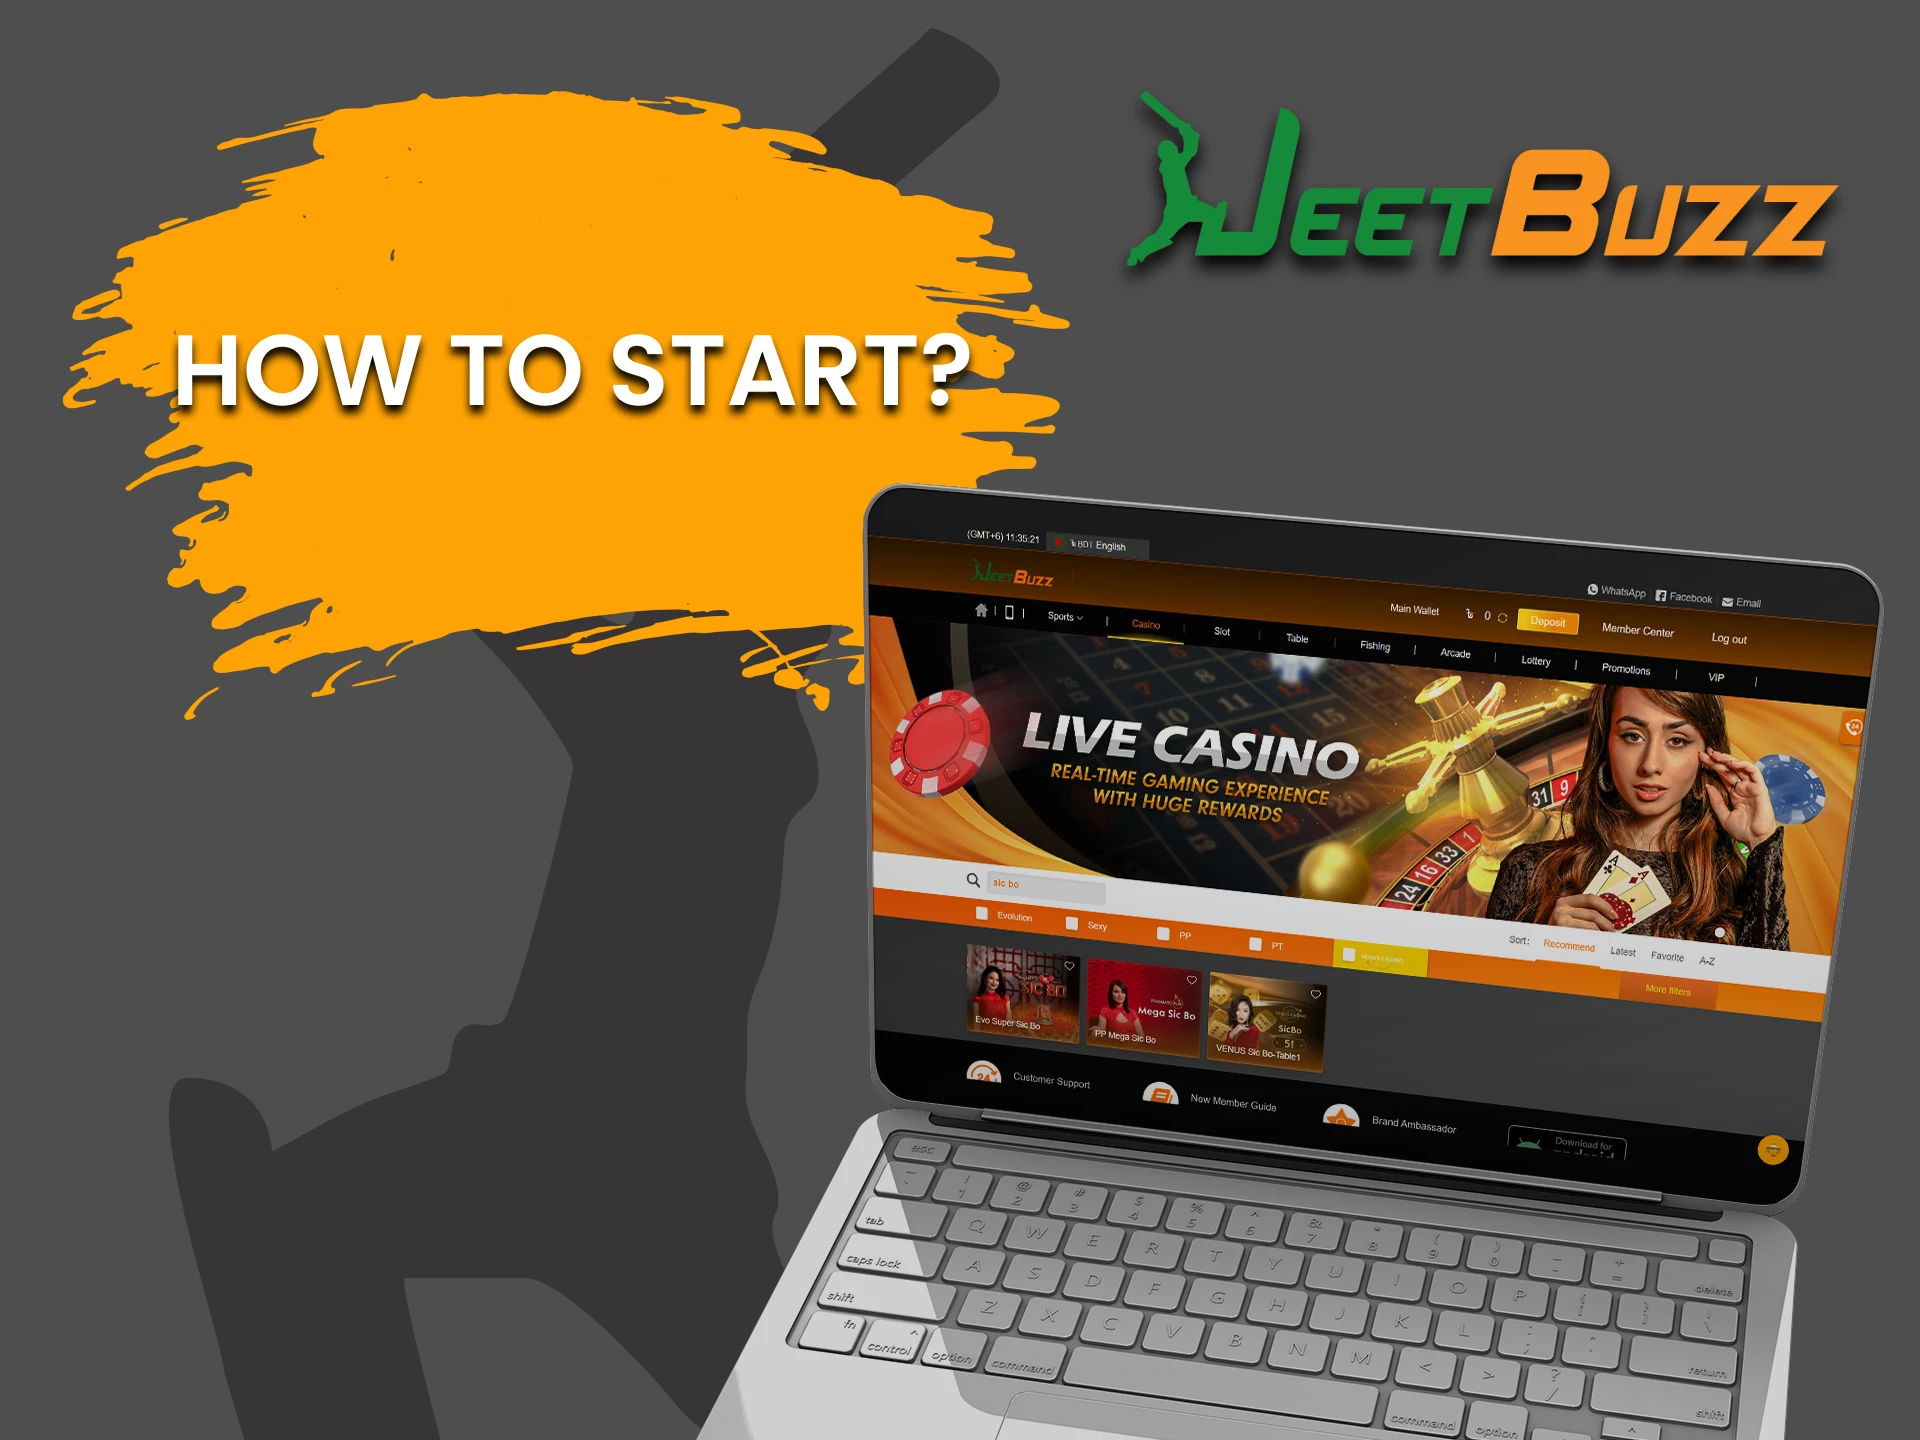 Go to the casino section of Jeetbuzz to play Sic Bo.